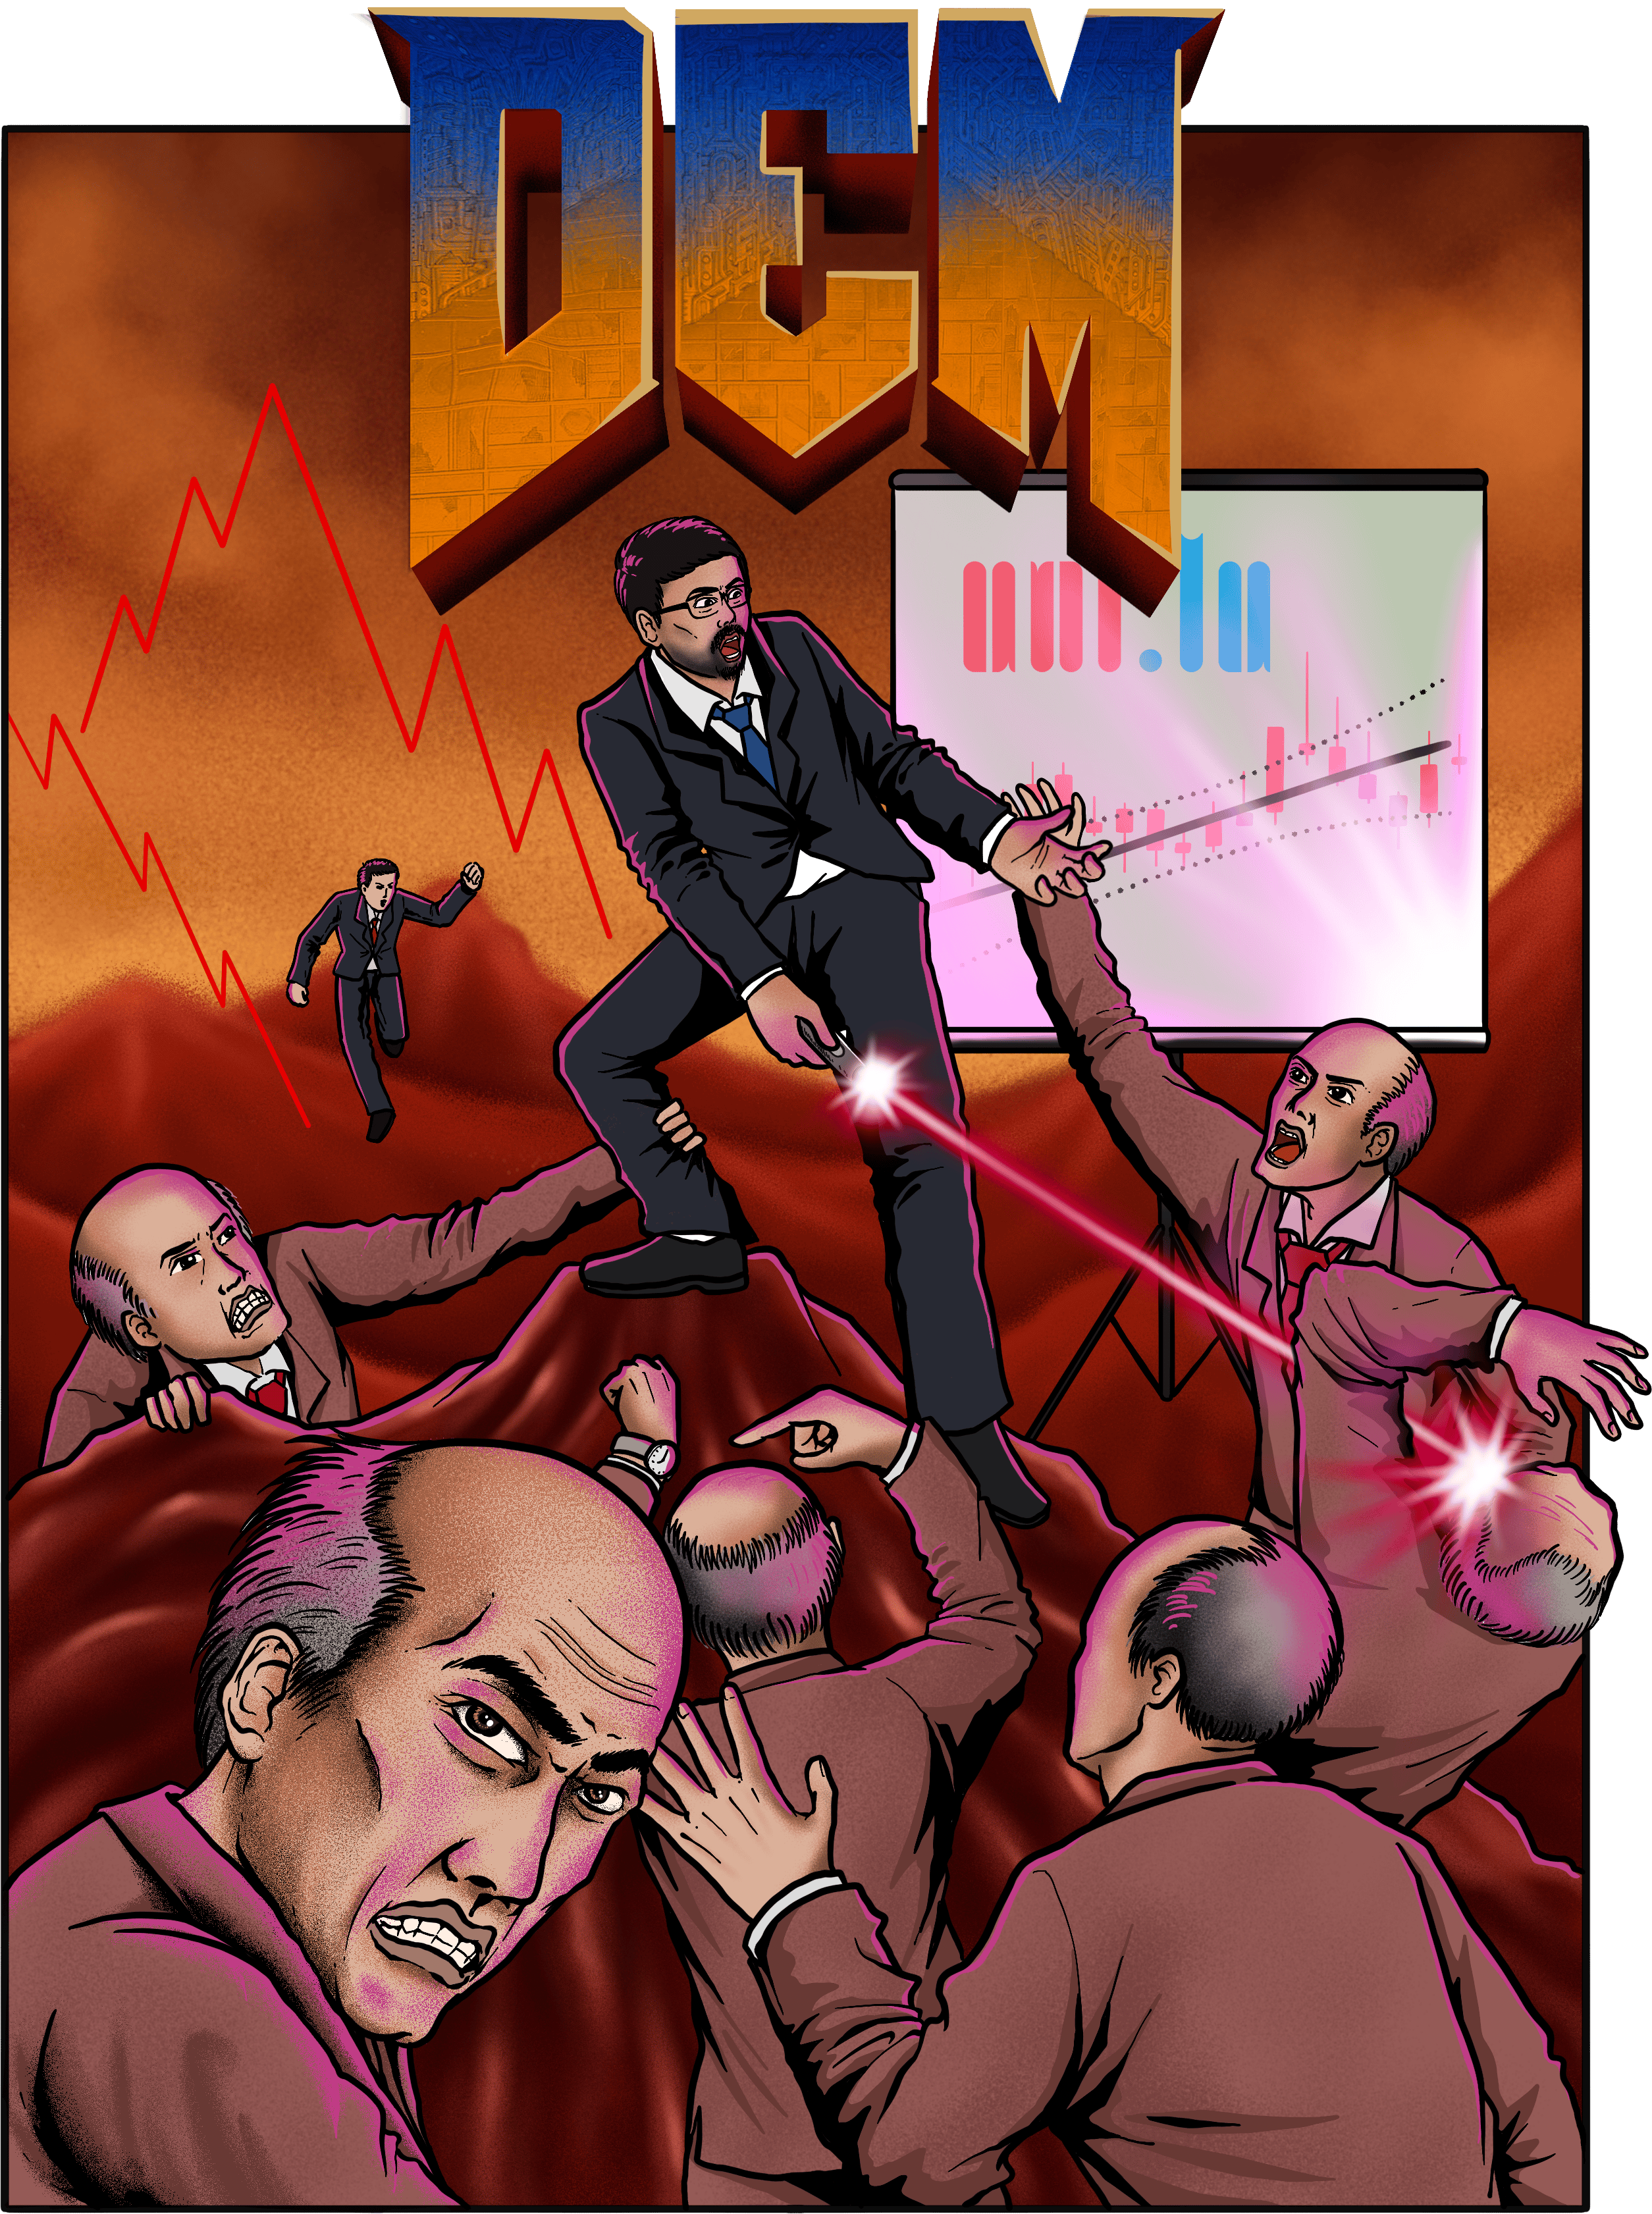 Unofficial University of Luxembourg, Department of Economics and Management (DEM) poster in the style of 1993 DooM cover art by Aslam Bokrit